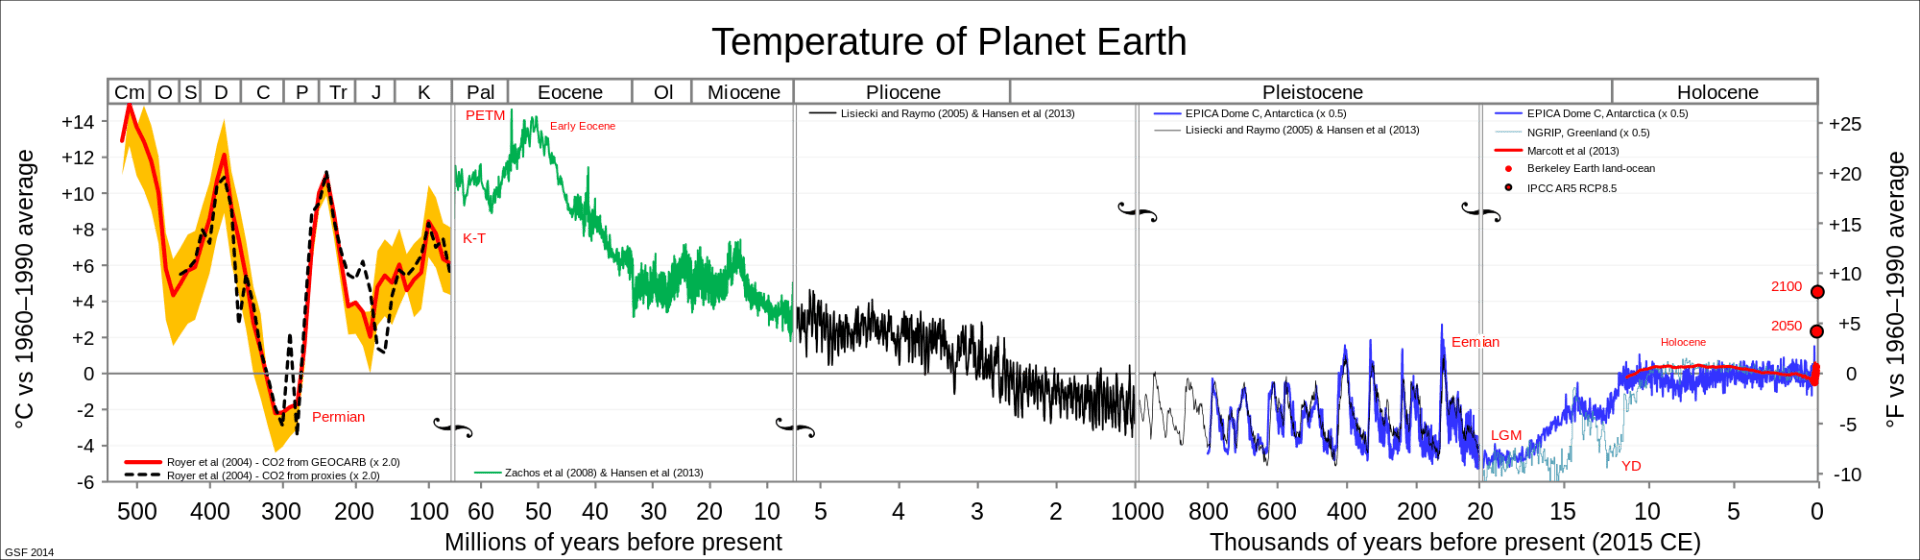 Reconstruction of global temperature in the Phanerozoic. 